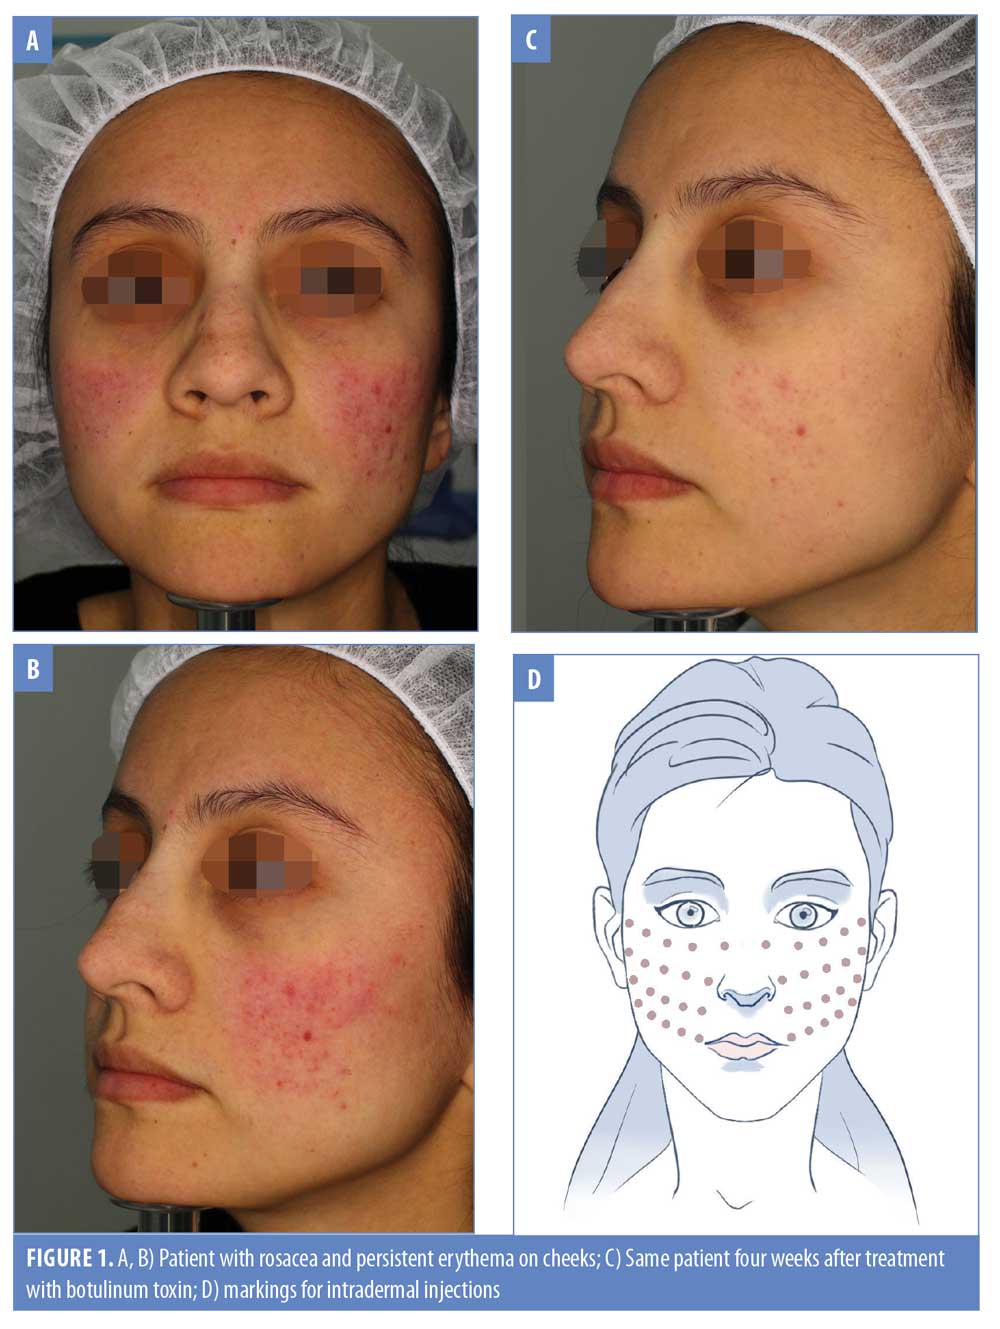 Luftpost Isse Ligegyldighed Botulinum Toxin: An Effective Treatment for Flushing and Persistent  Erythema in Rosacea – JCAD | The Journal of Clinical and Aesthetic  Dermatology